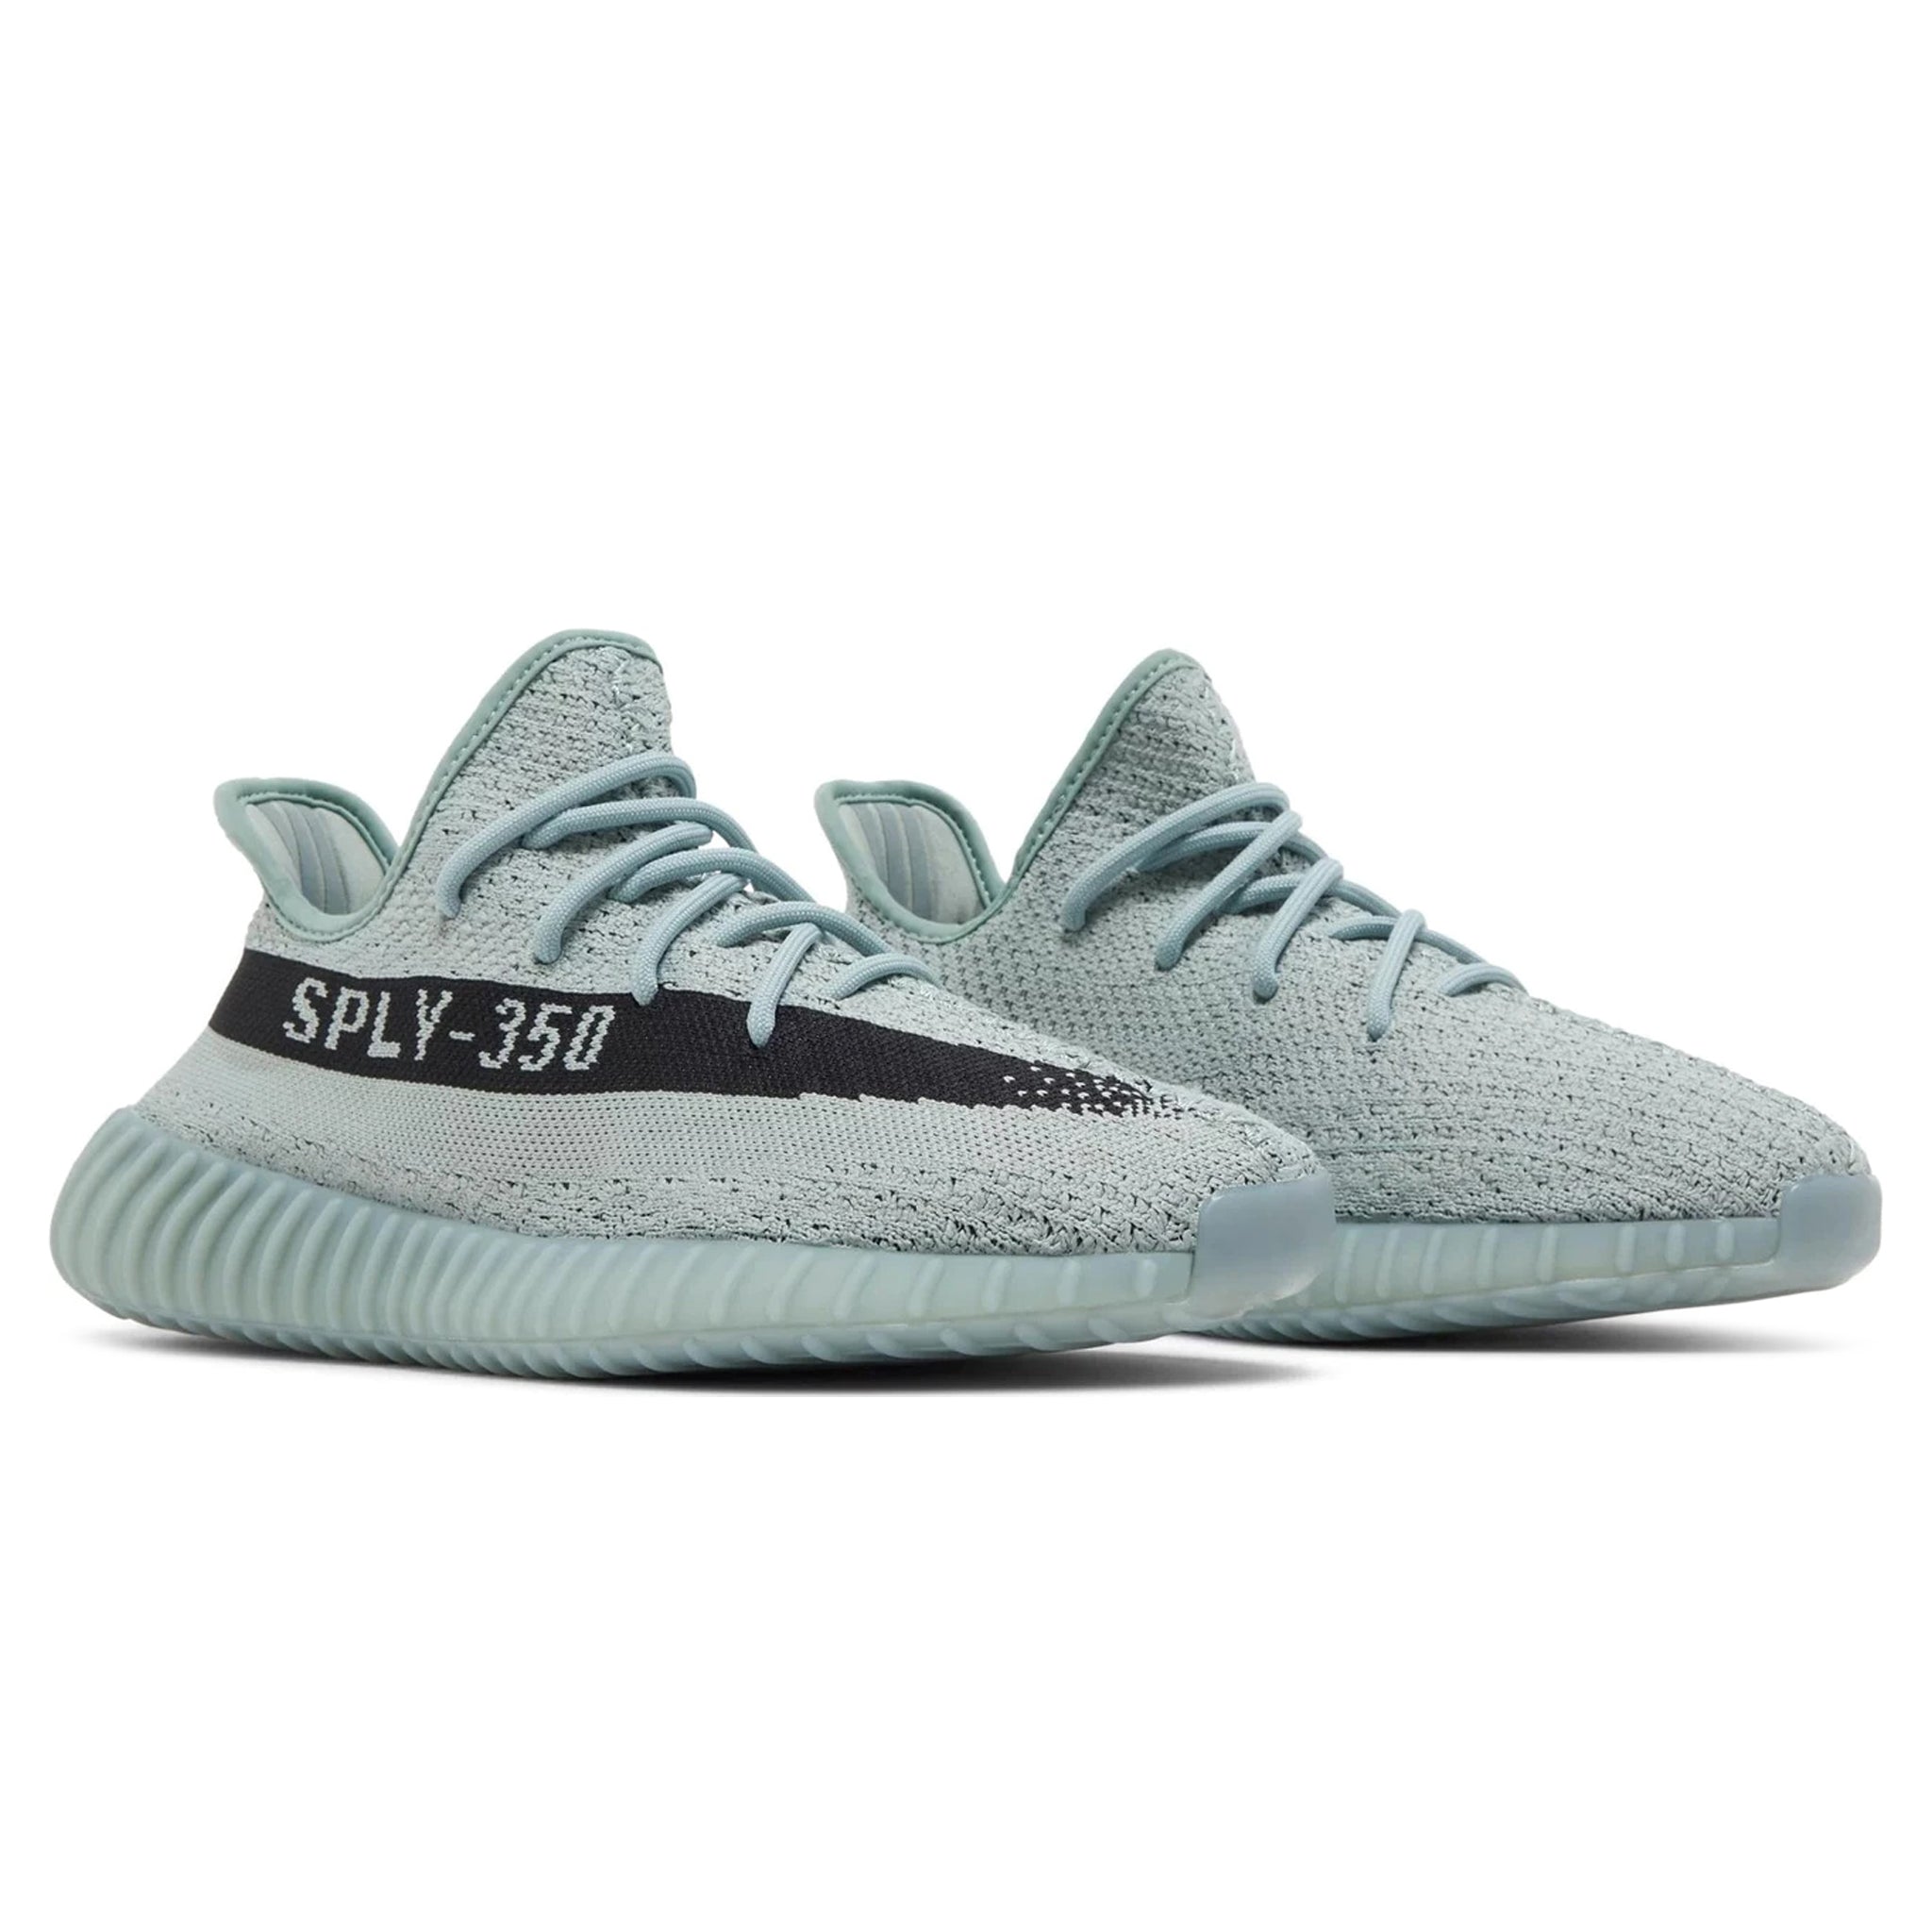 Front side view of Adidas Yeezy Boost 350 V2 Salt HQ2060